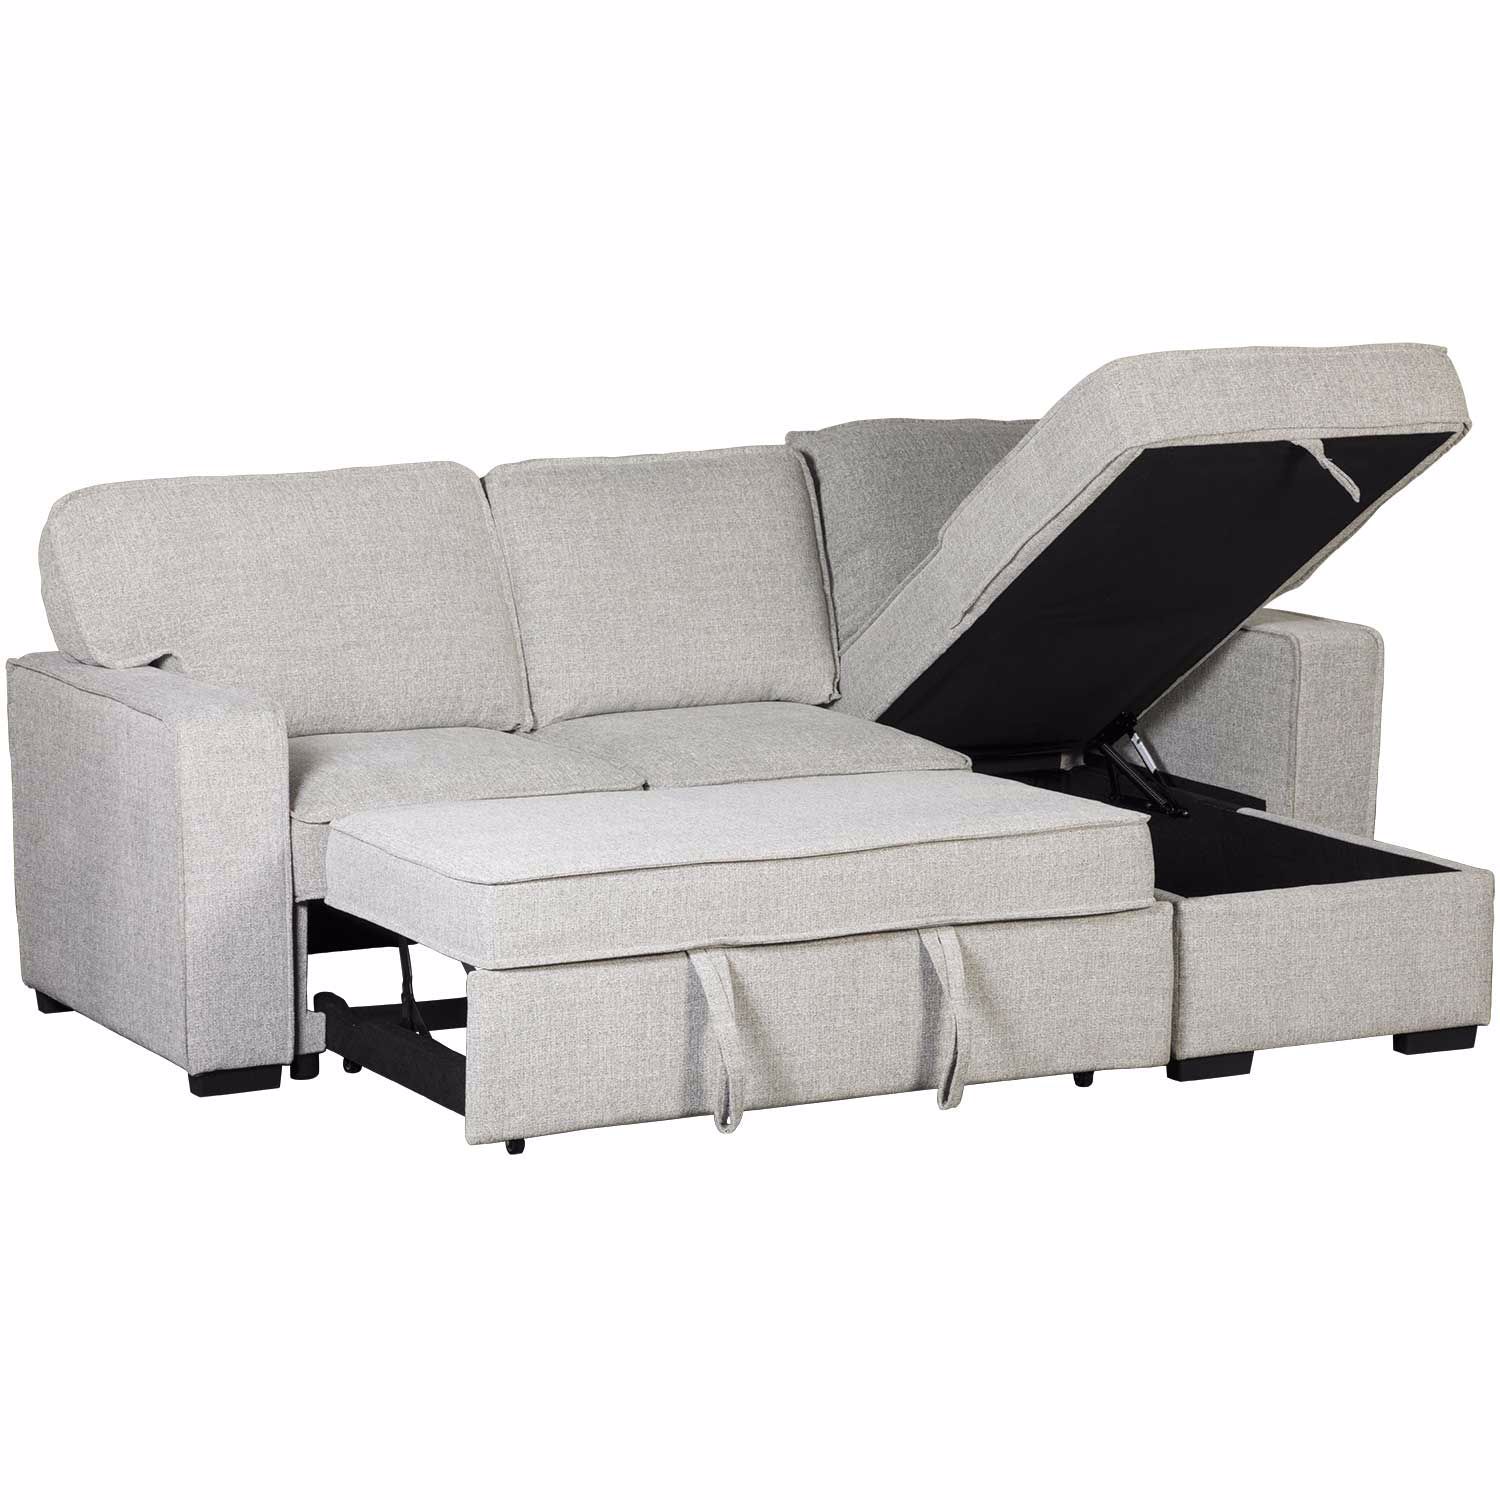 Kent Reversible Sofa Chaise with Storage 1D 684 LL RC ARM AFW com